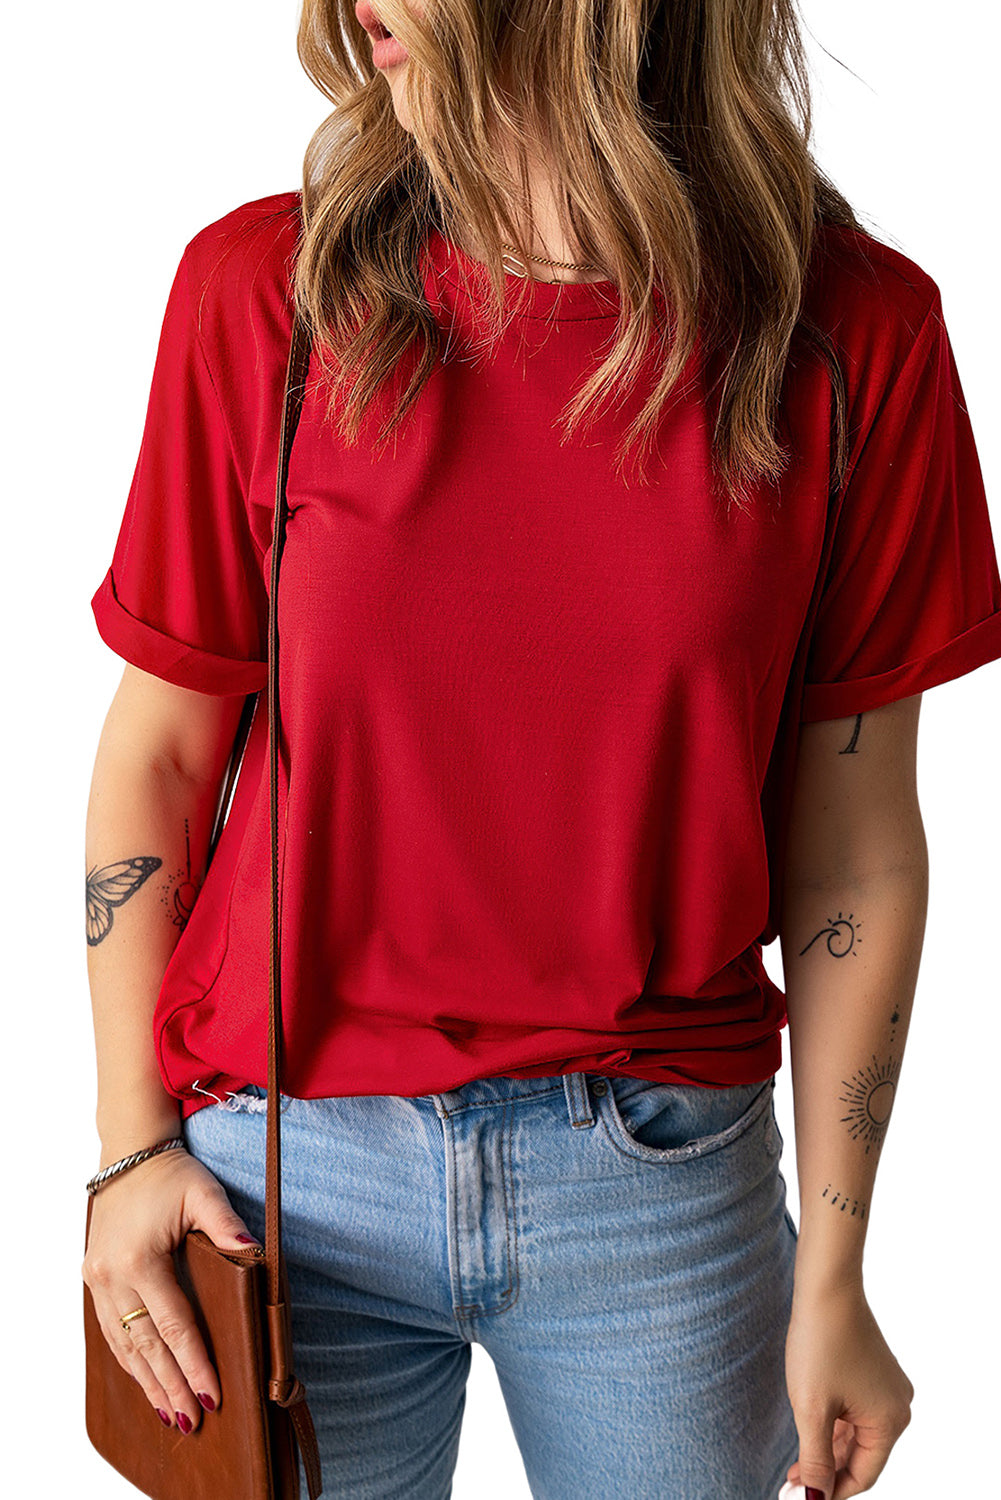 Blank T Shirt - Red Solid Color Basic Crew Neck Tee Customized